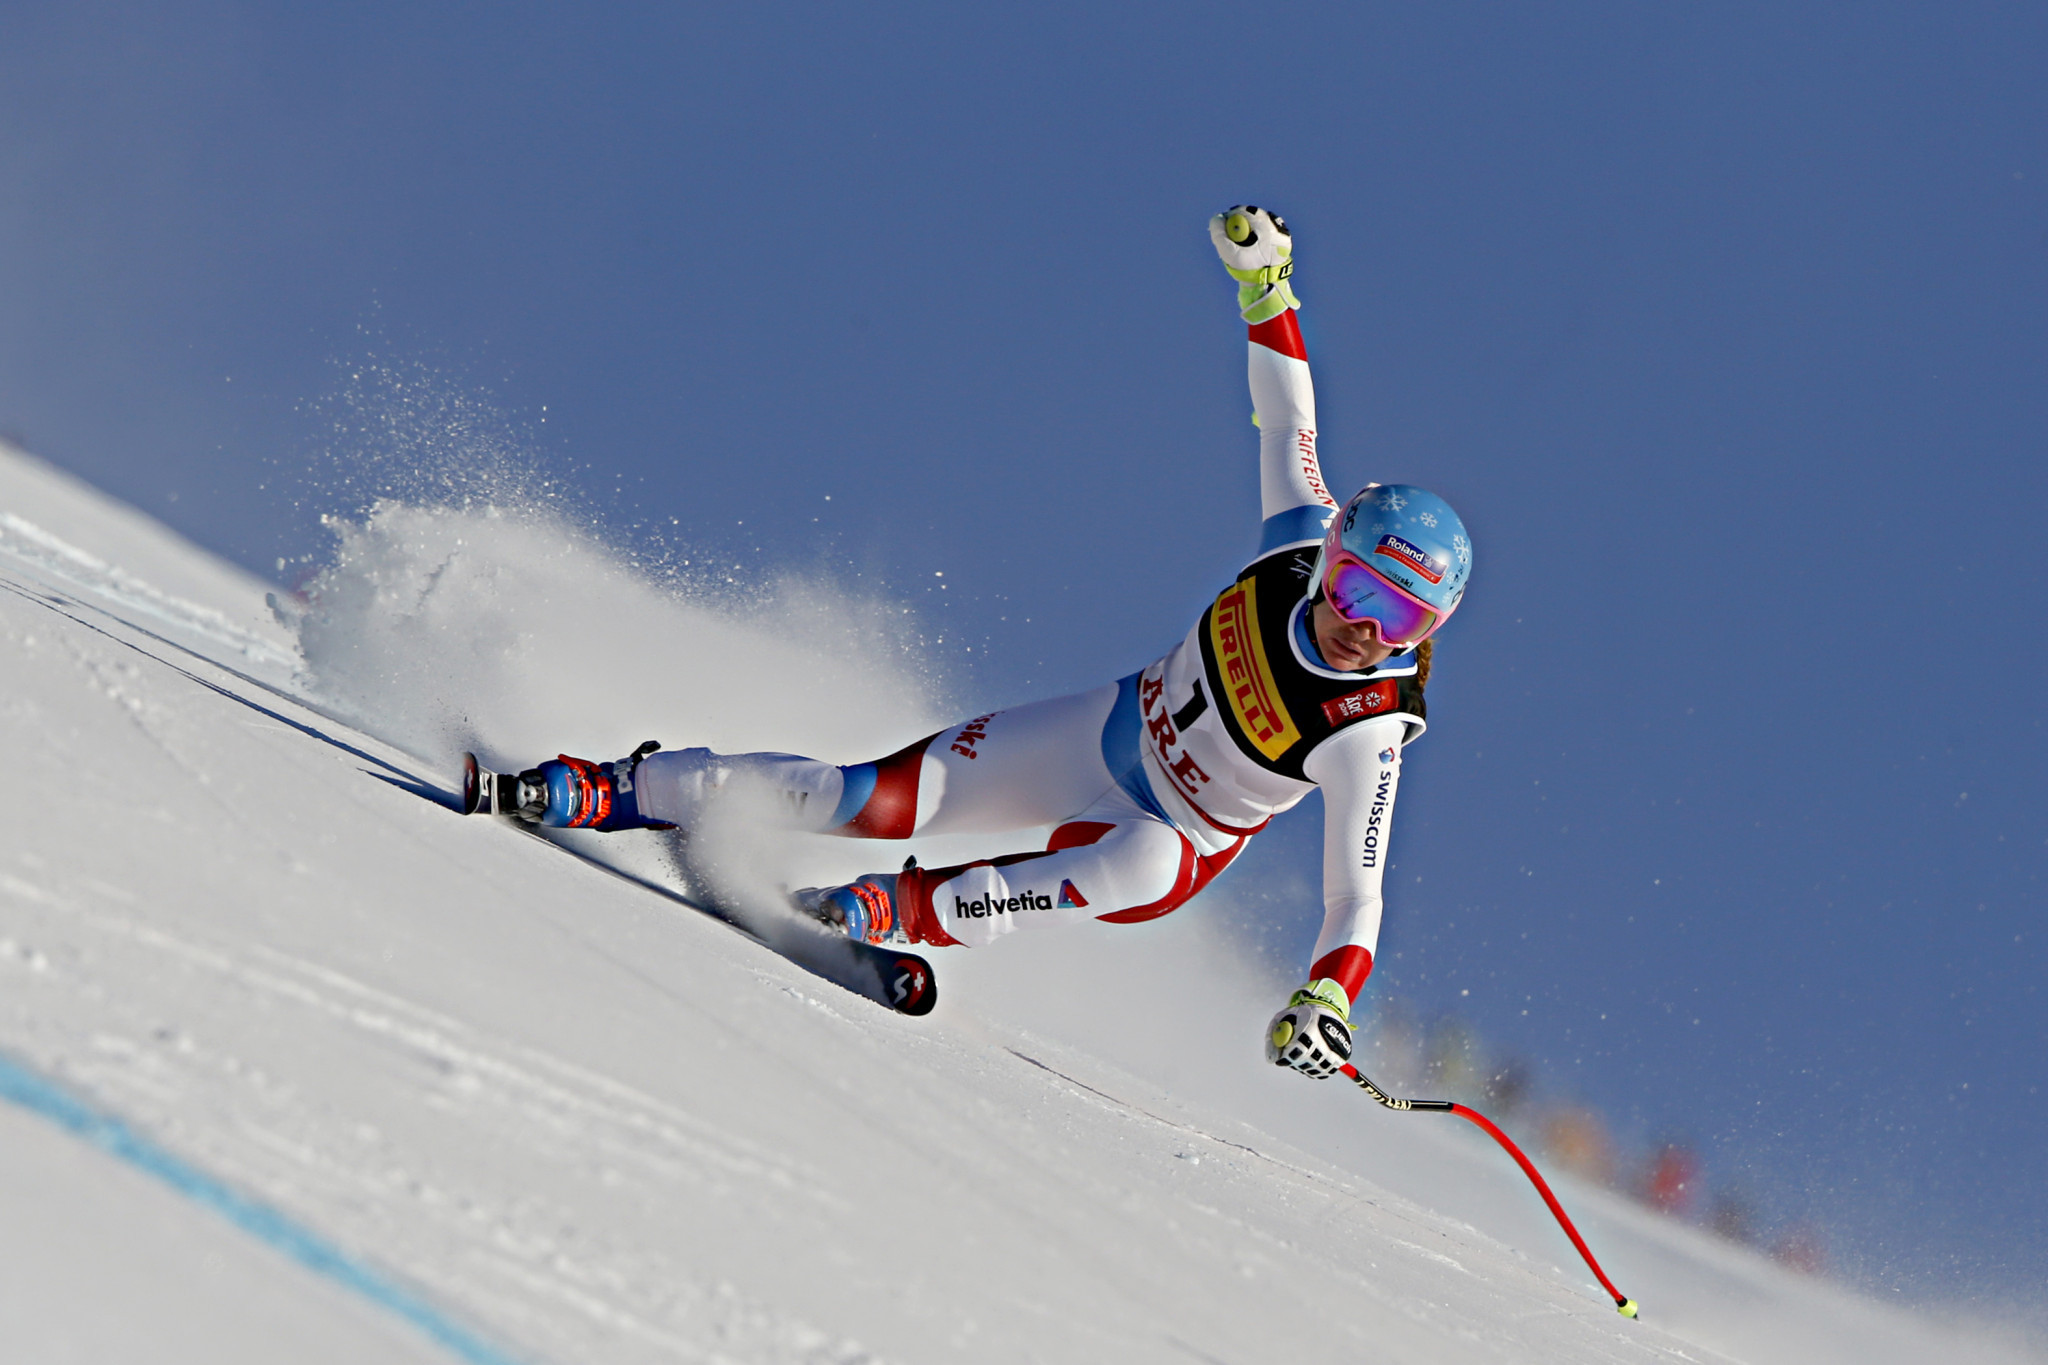 Switzerland's Jasmine Flury failed to finish the very first run of the contest ©Getty Images